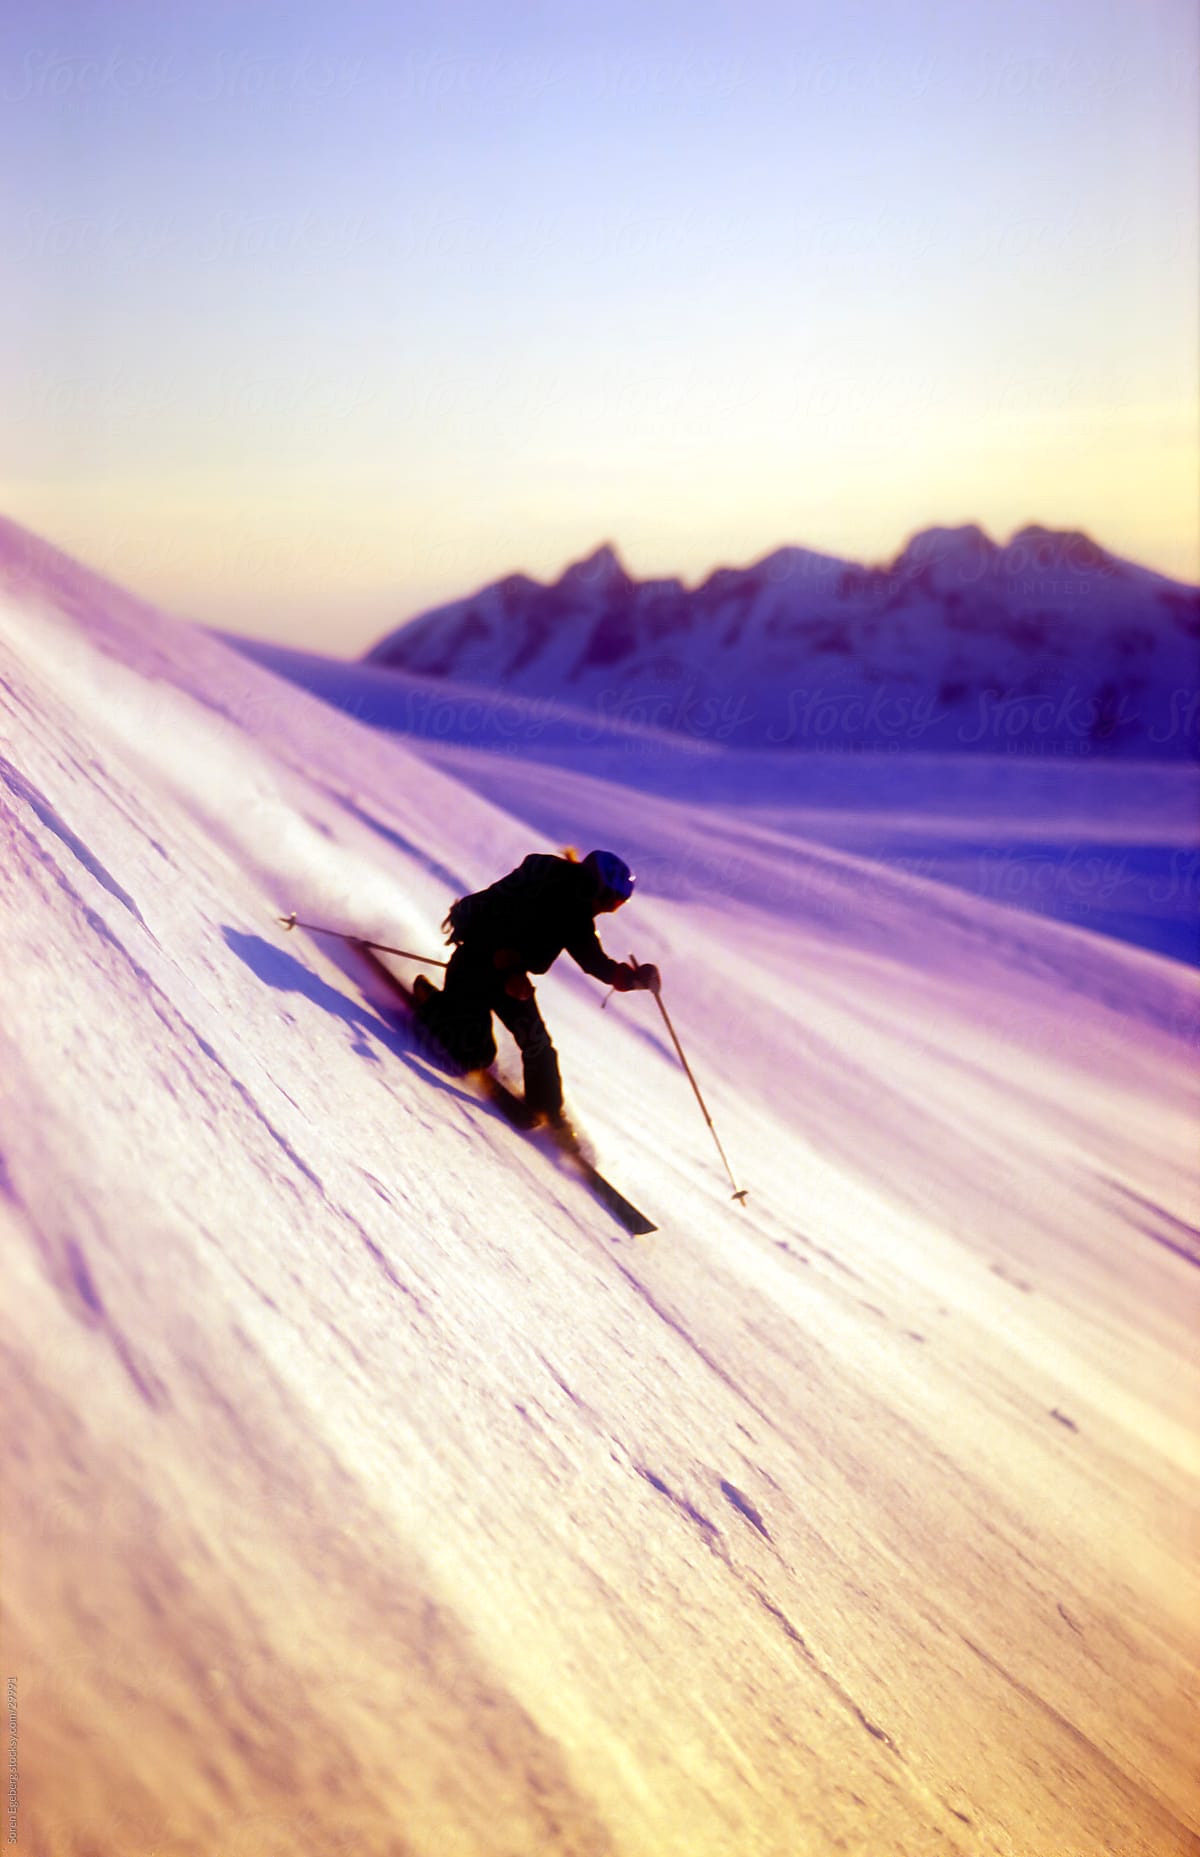 Young adult female skier skiing a steep snow slope at sunset